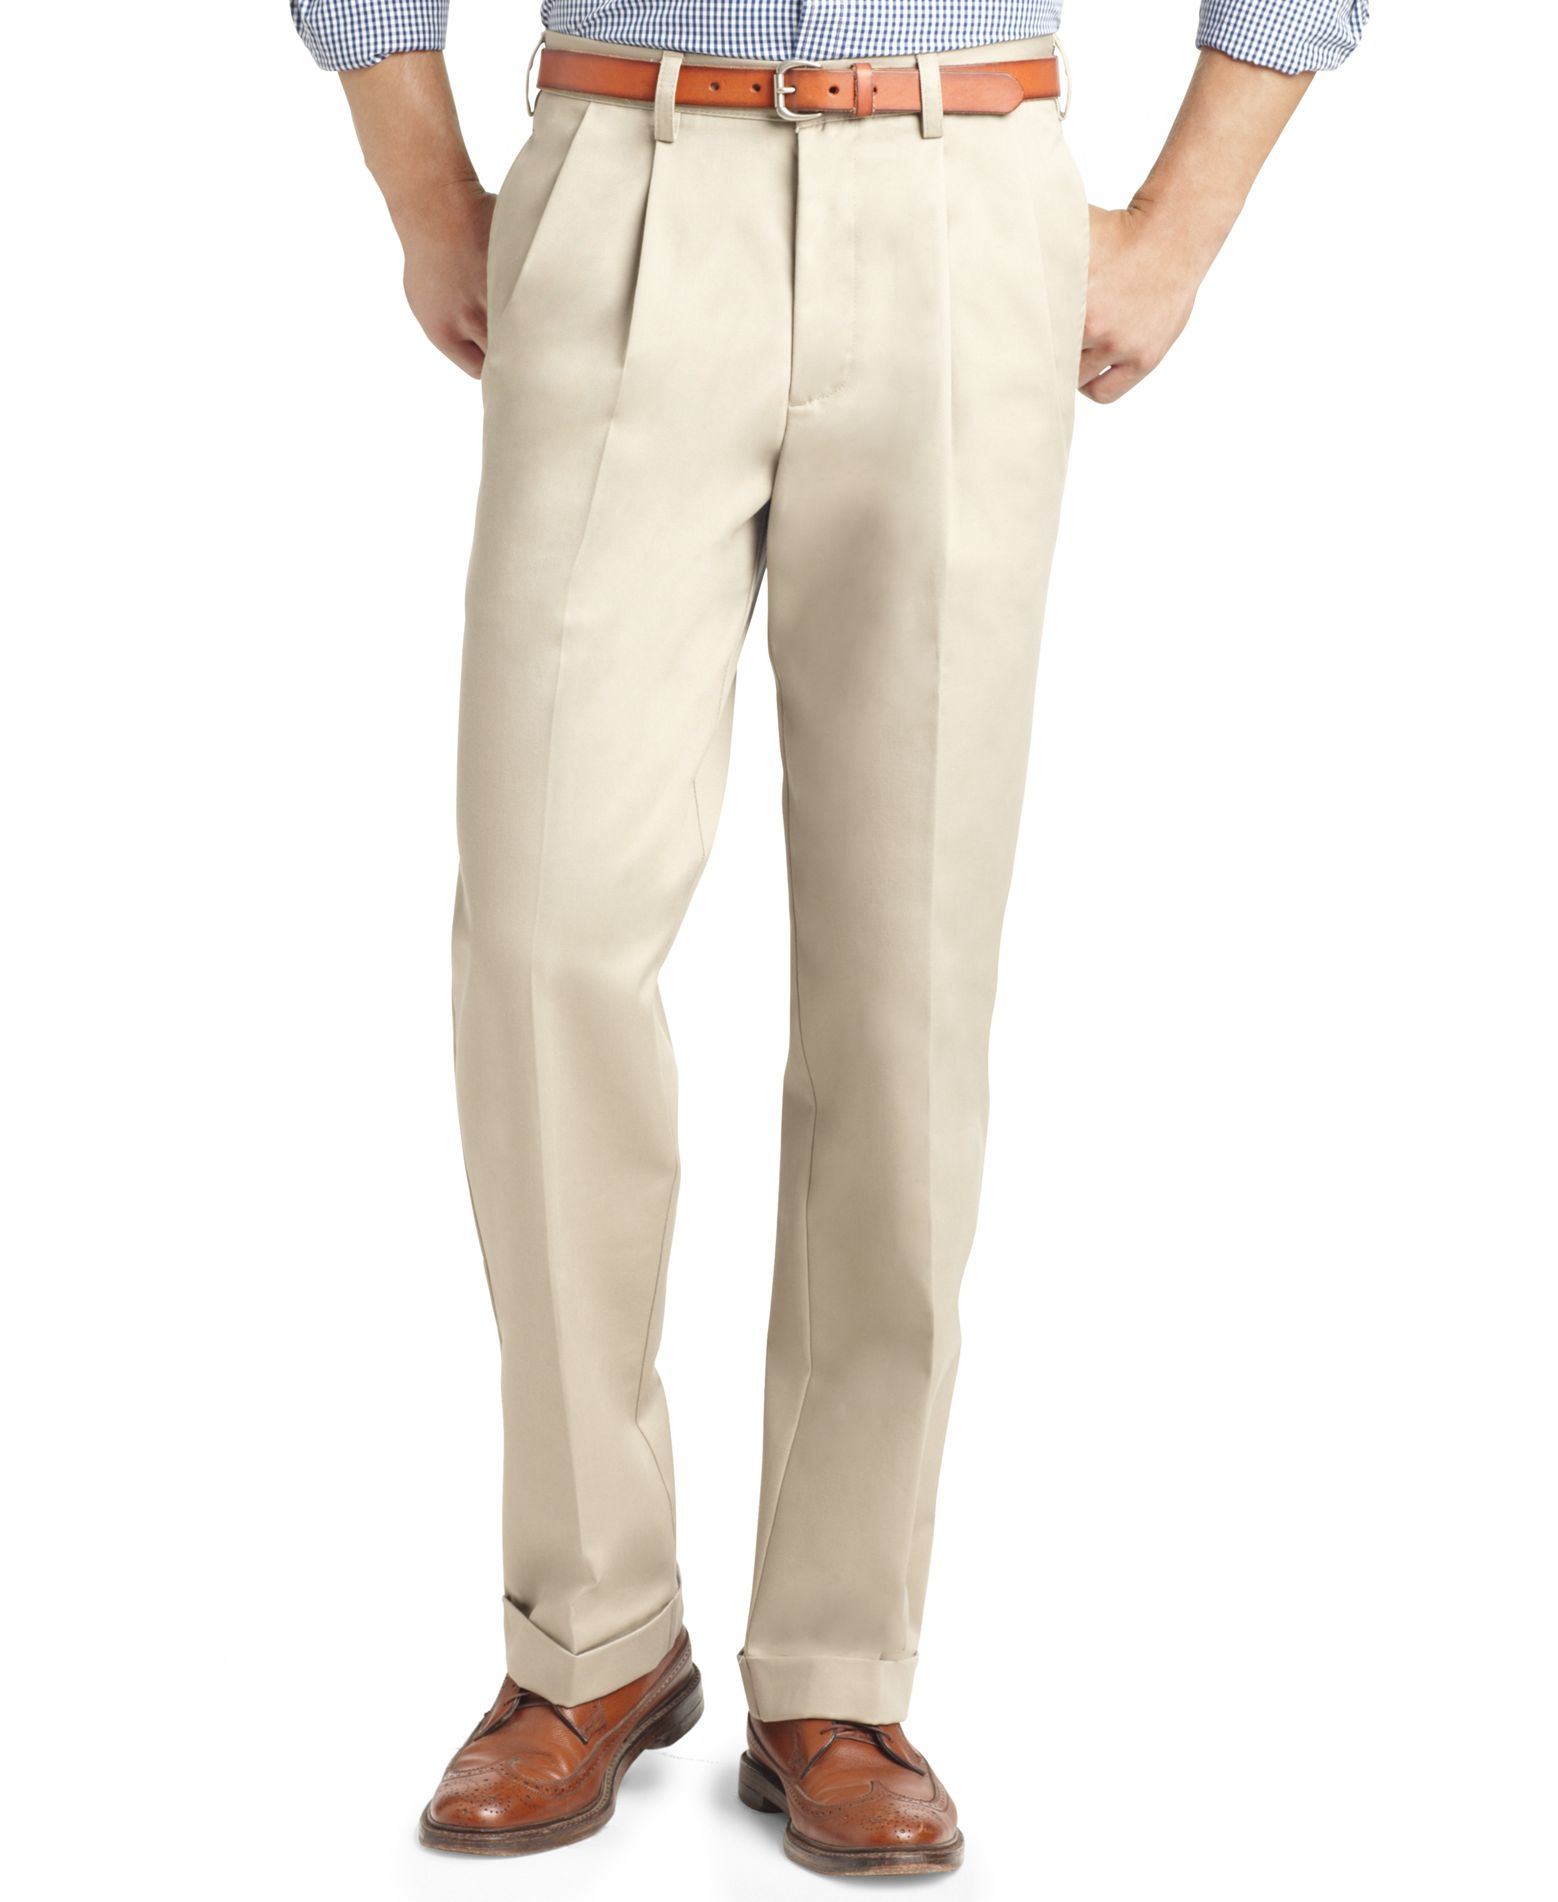 Lyst - Izod Big And Tall Pants, Double Pleat Pants in Natural for Men